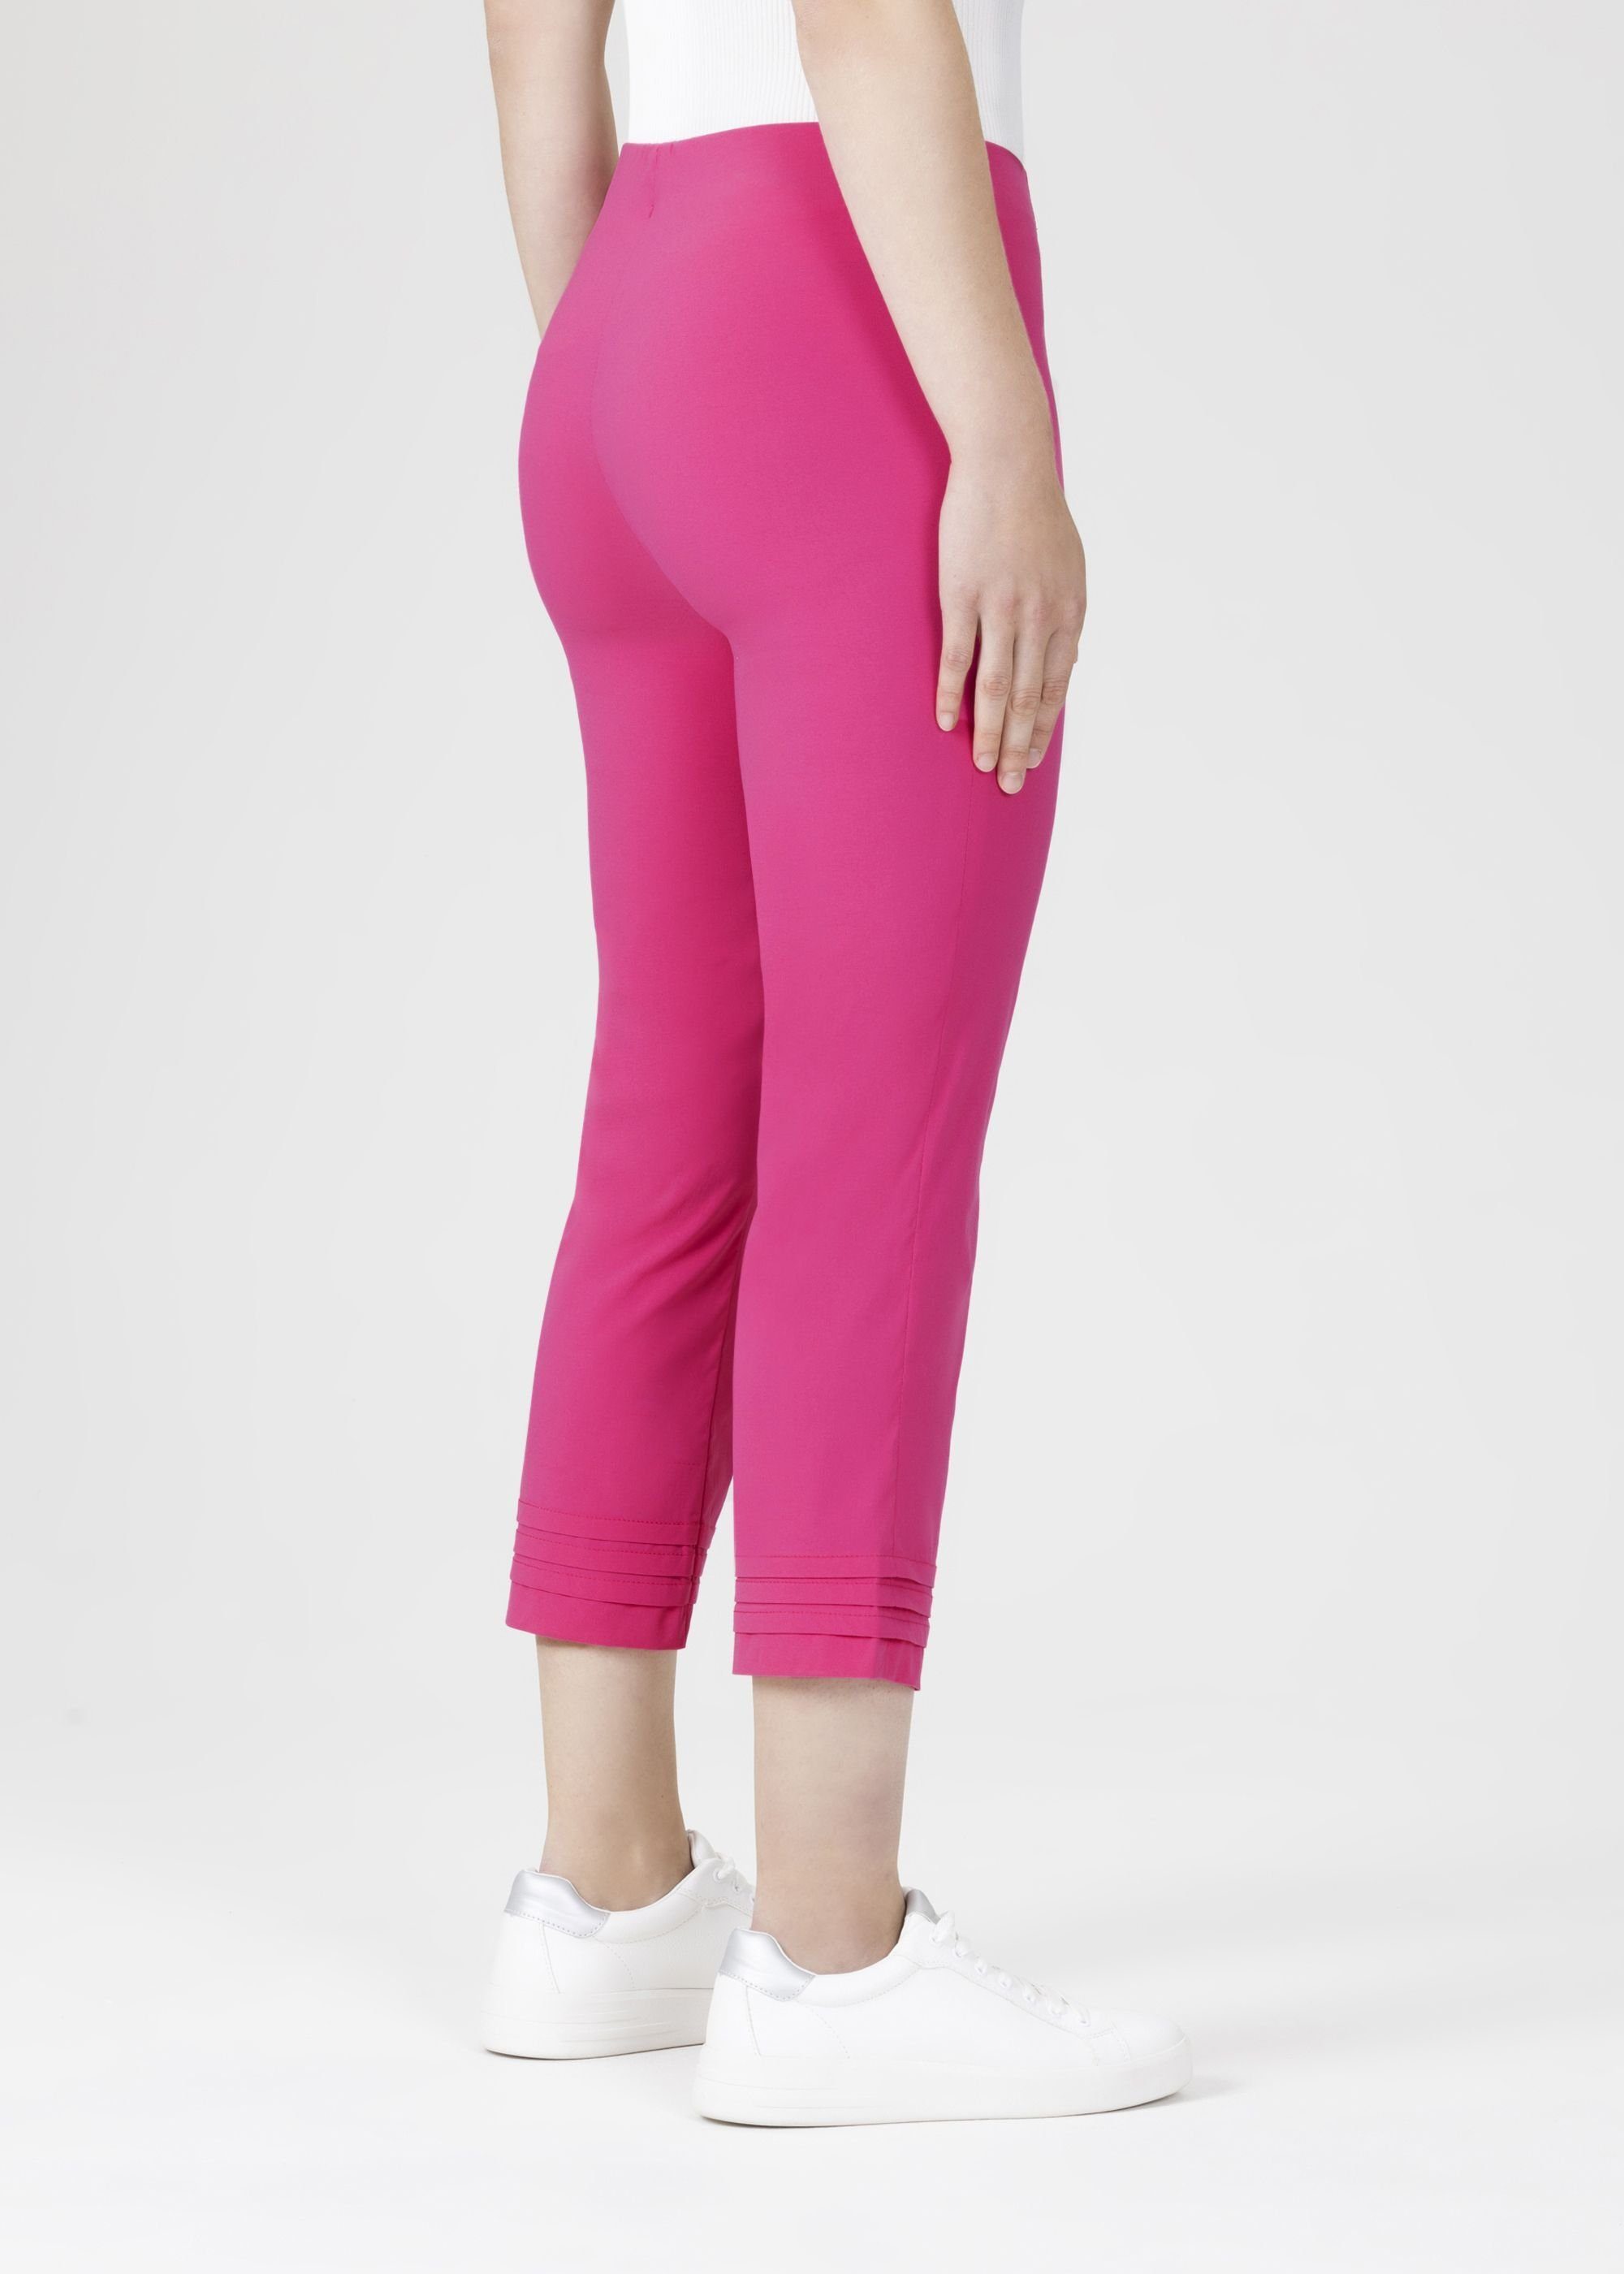 fluo Stoffhose fuxia Stehmann Ina Faltendetails mit